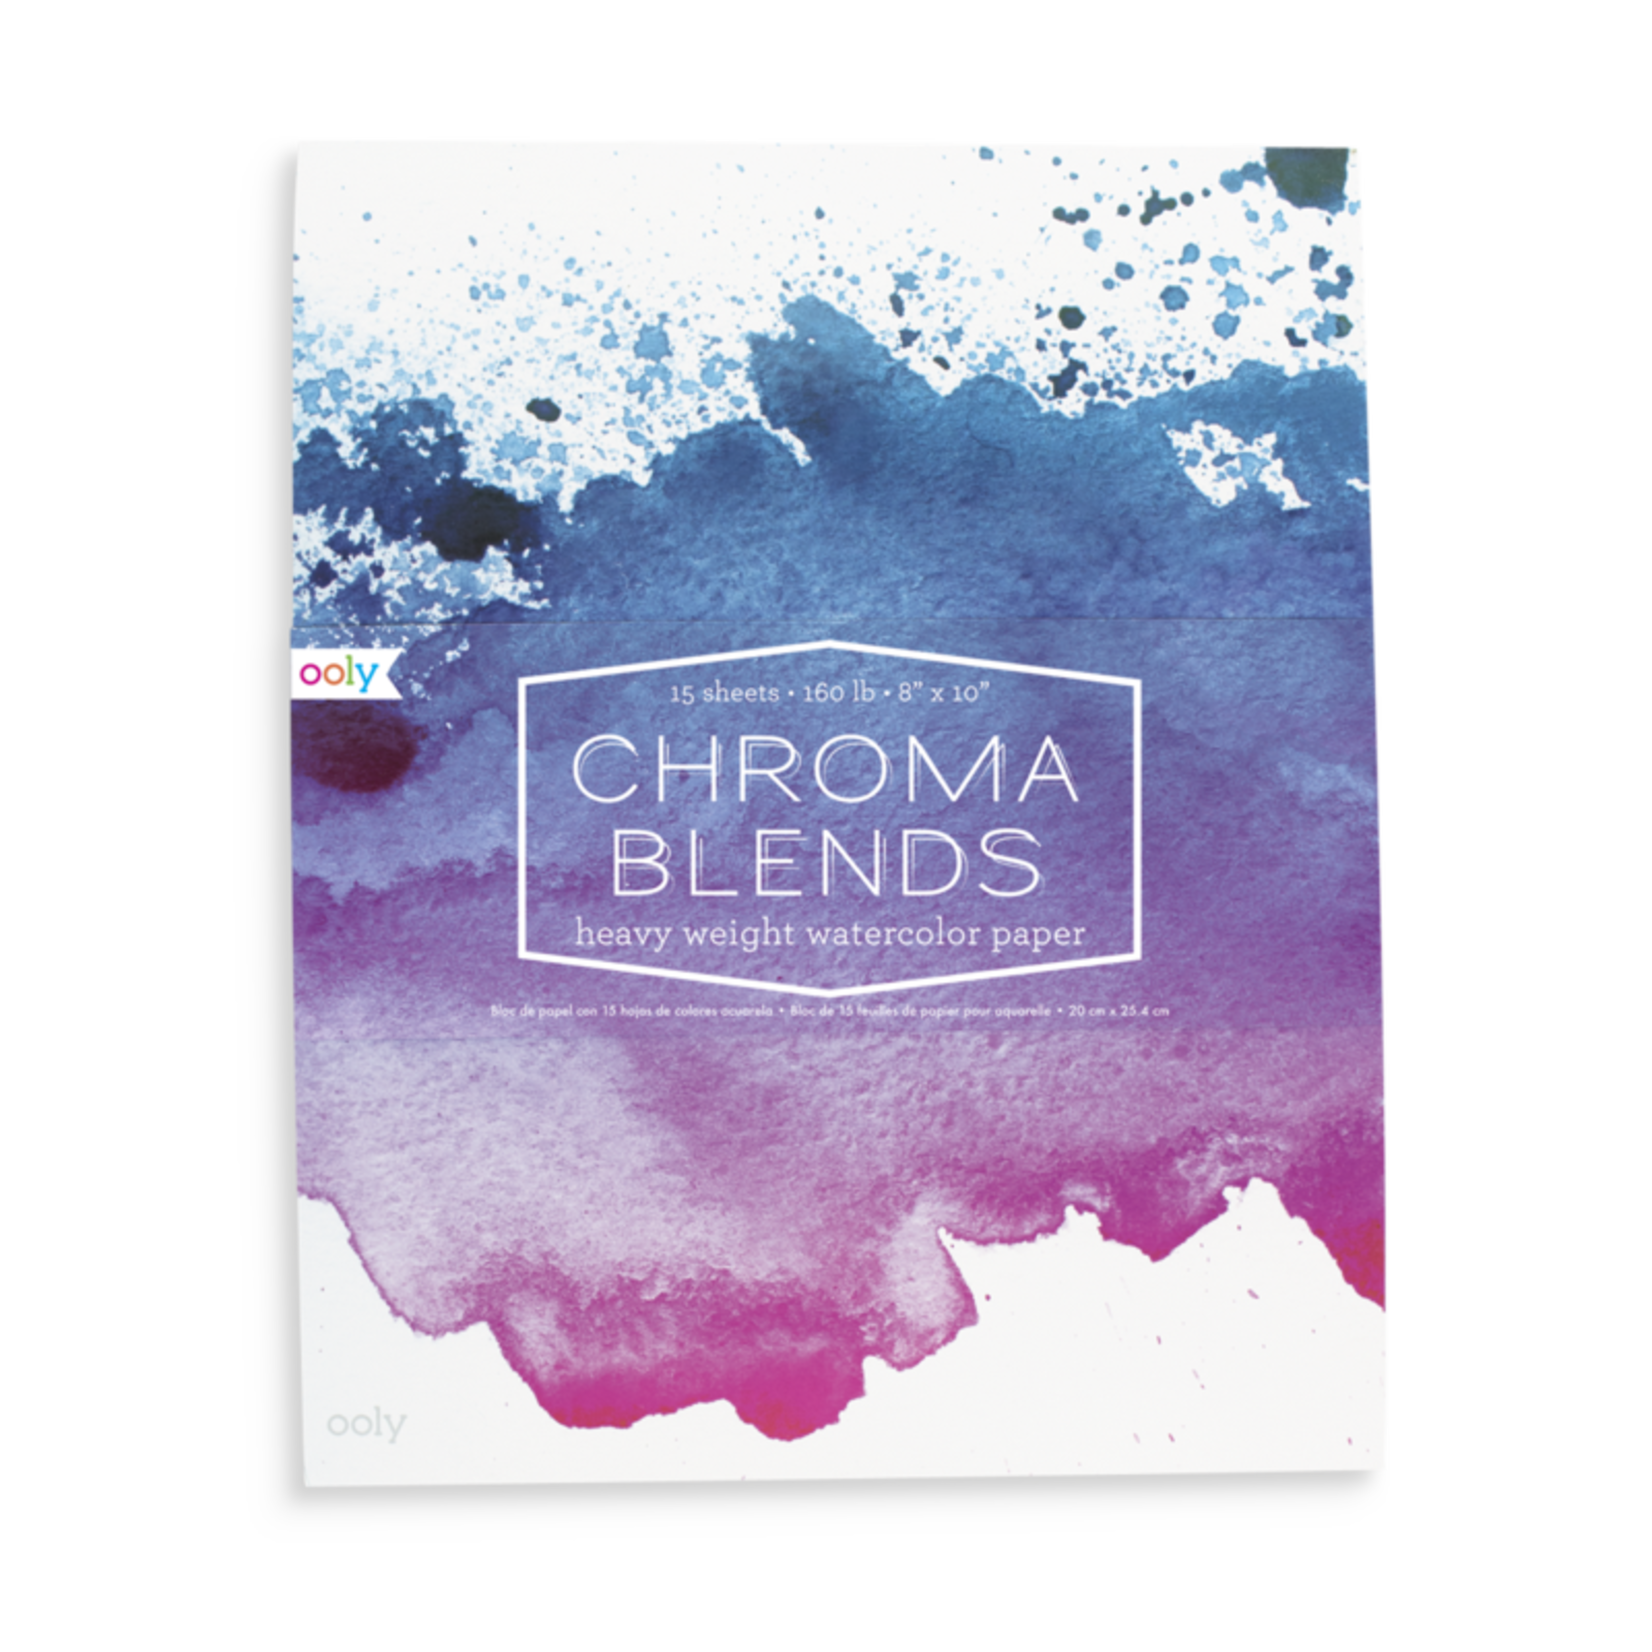 OOLY Chroma Blends Watercolor Pad